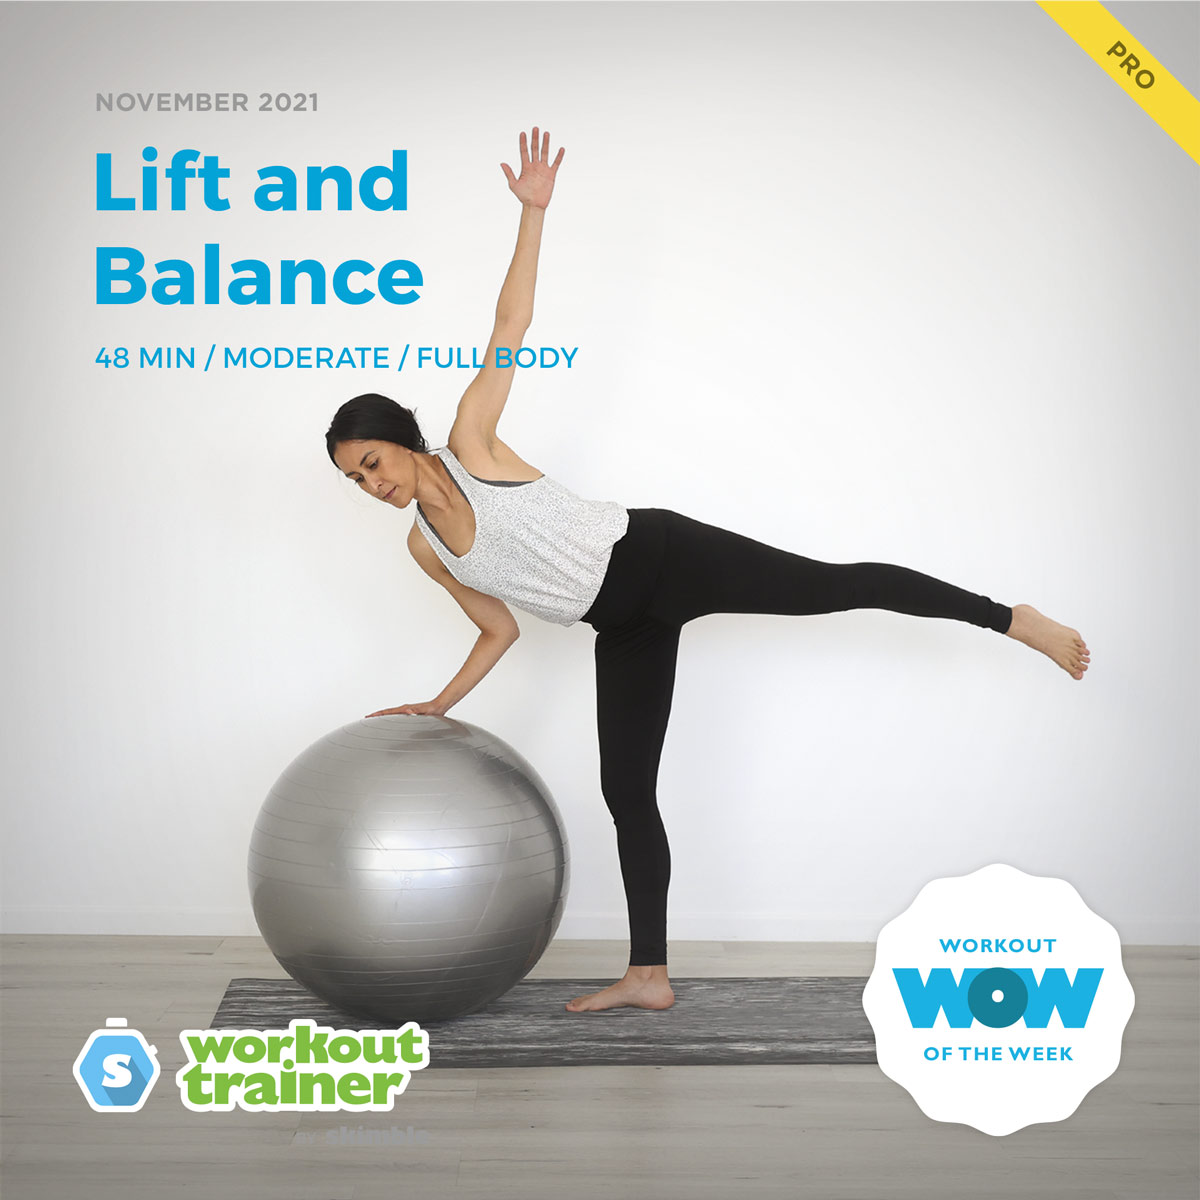 Female Barre Instructor doing standing side-splits with a stability ball